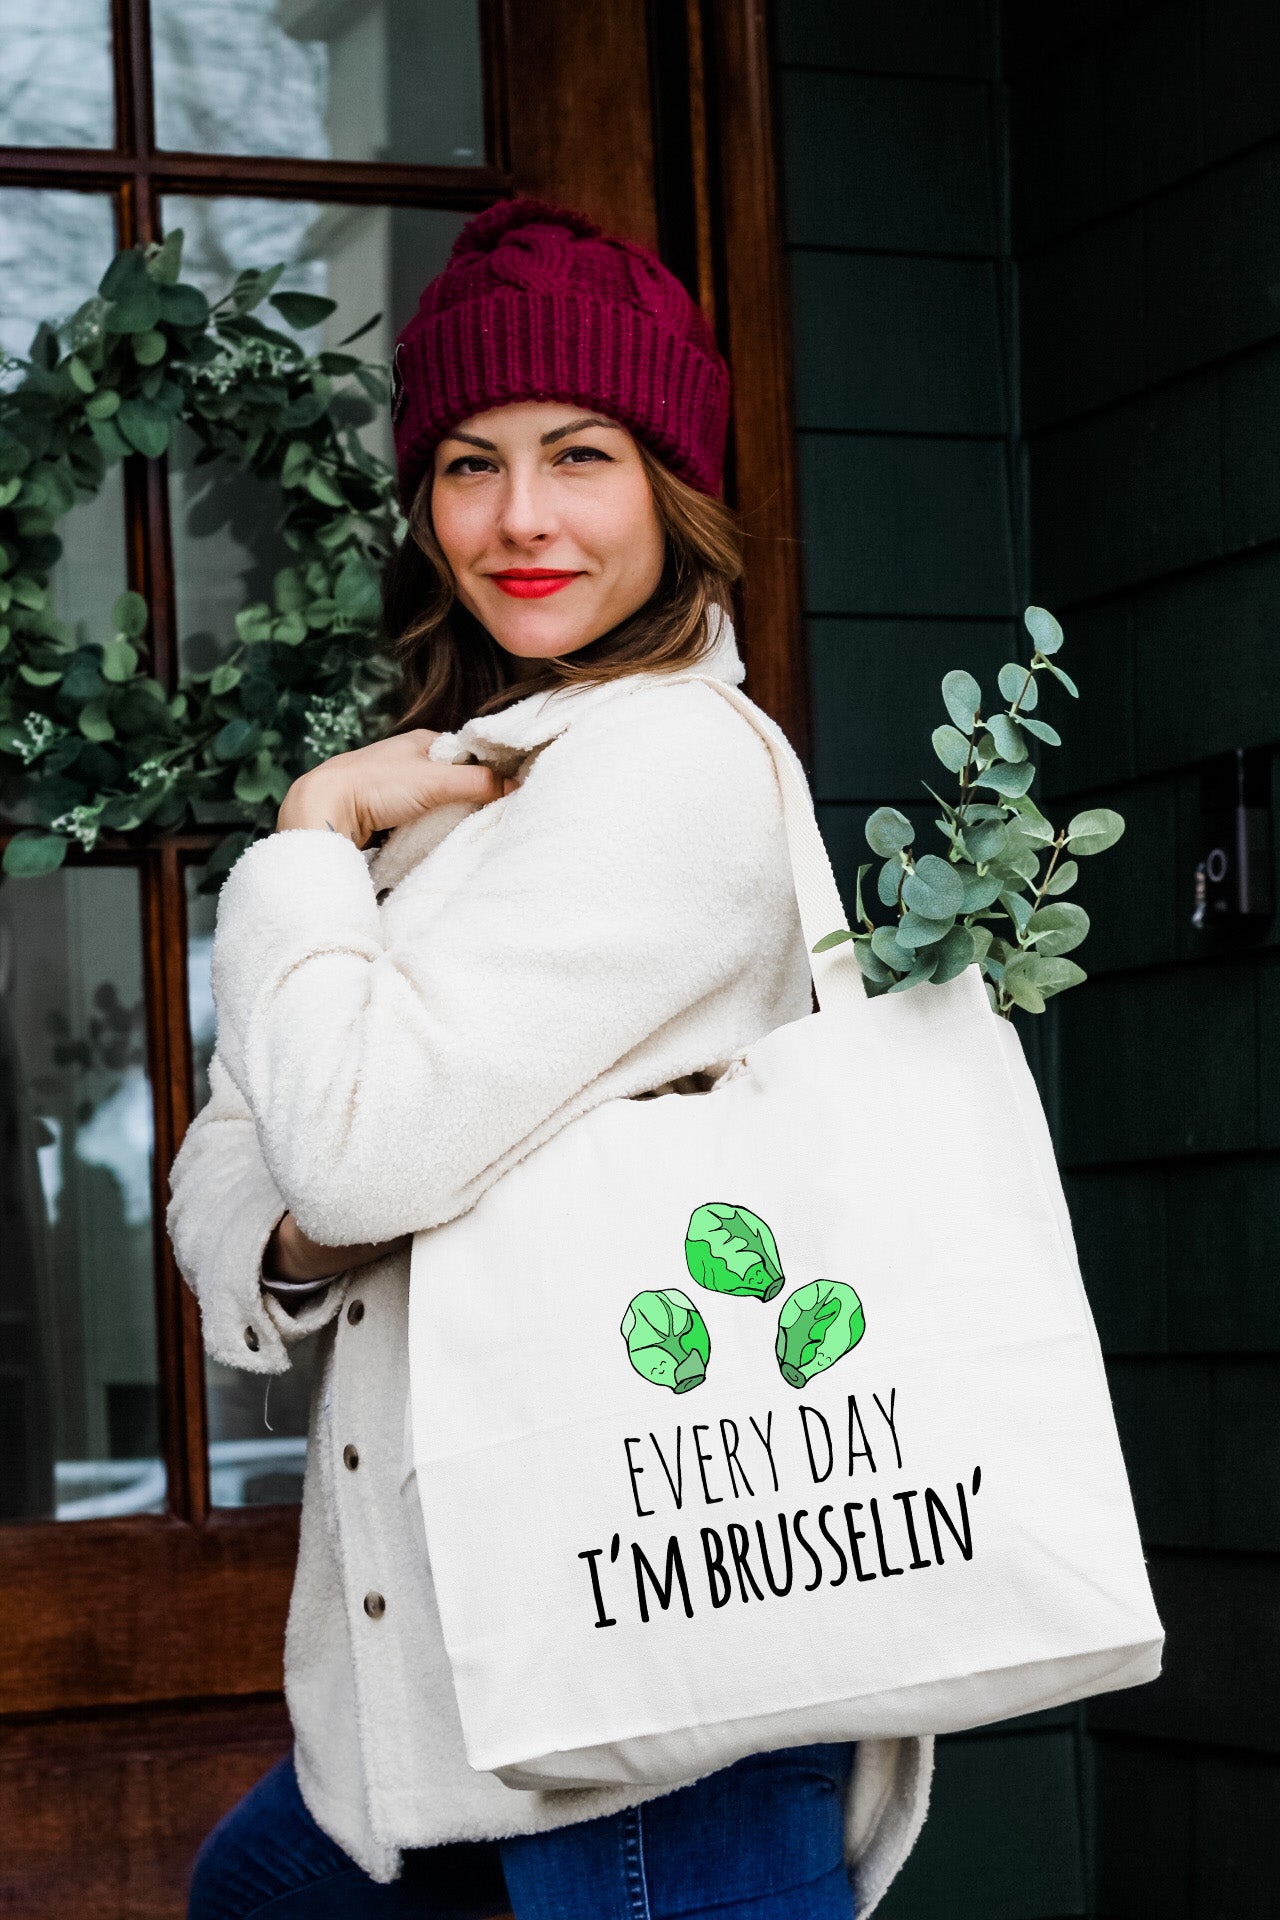 a woman carrying a bag that says every day i'm brussels